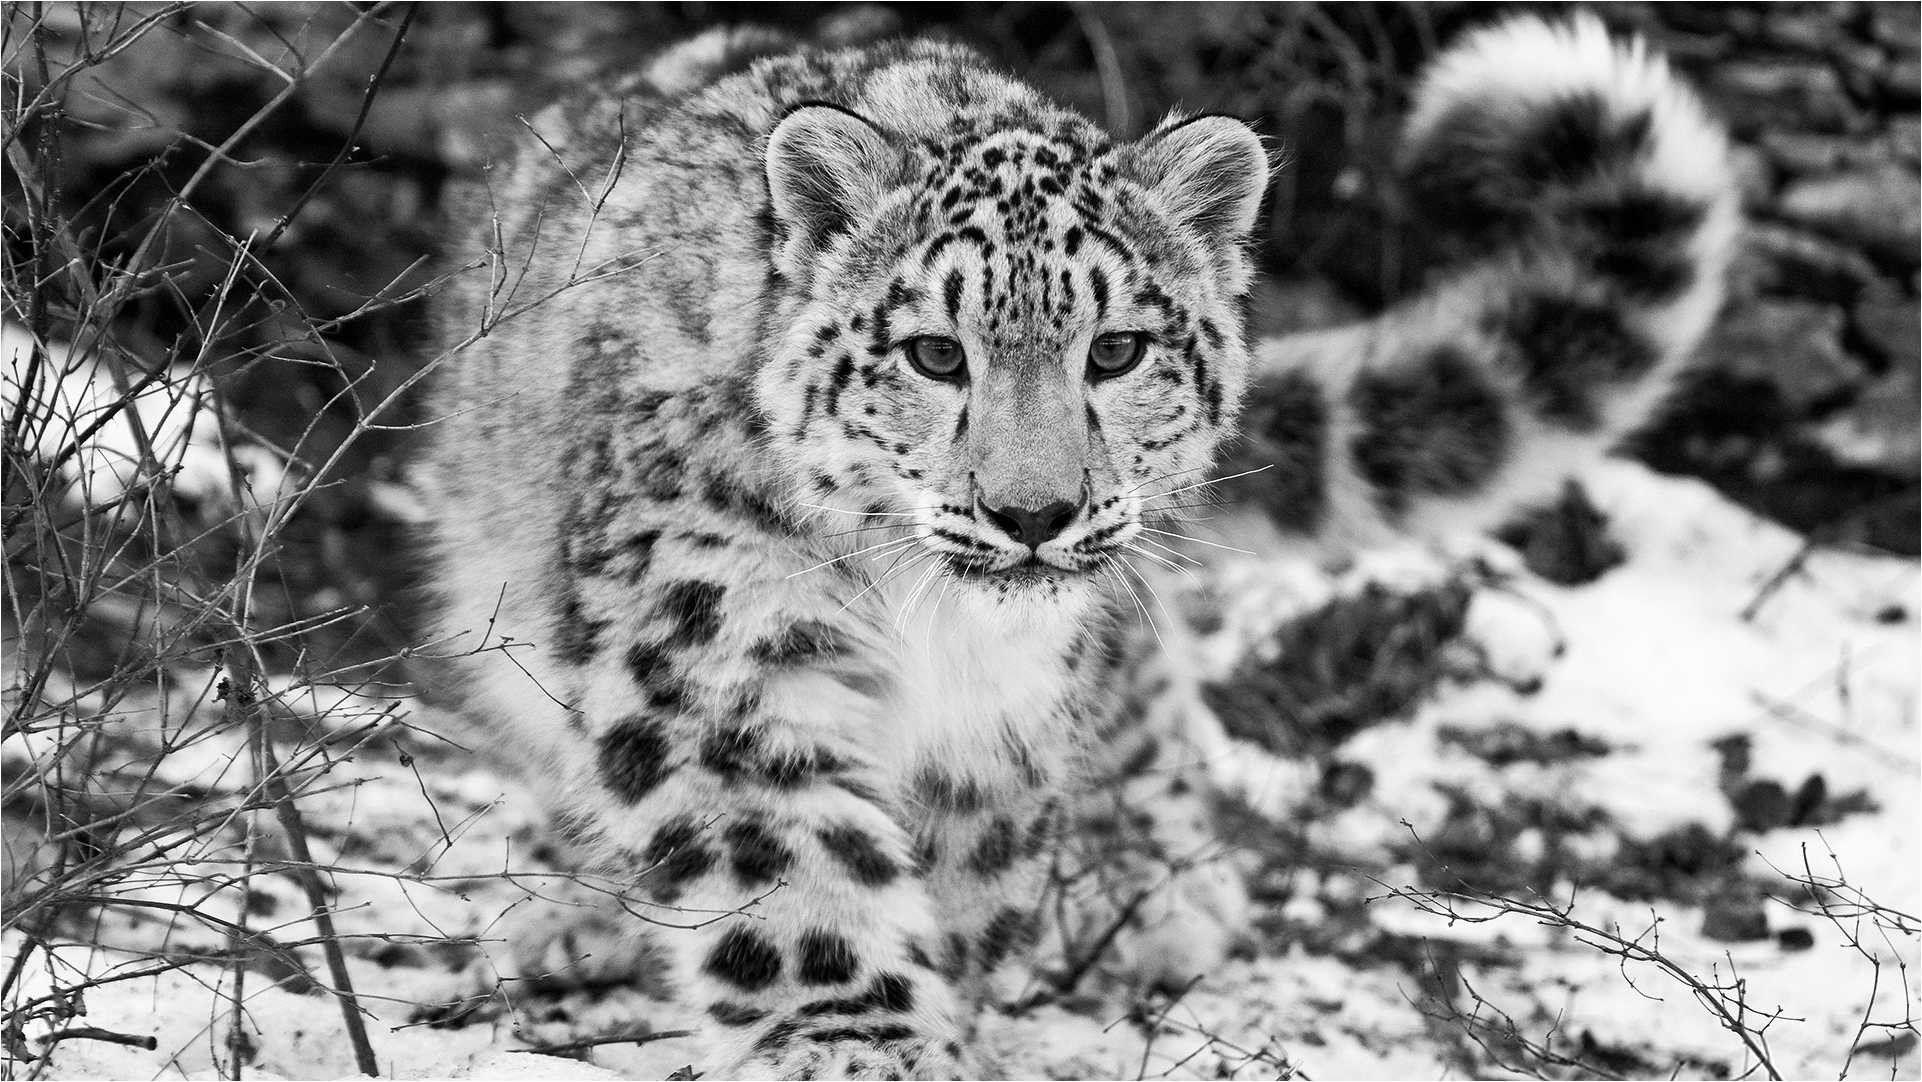 Baby Snow Leopard Wallpapers - Top Free Baby Snow Leopard Backgrounds ...